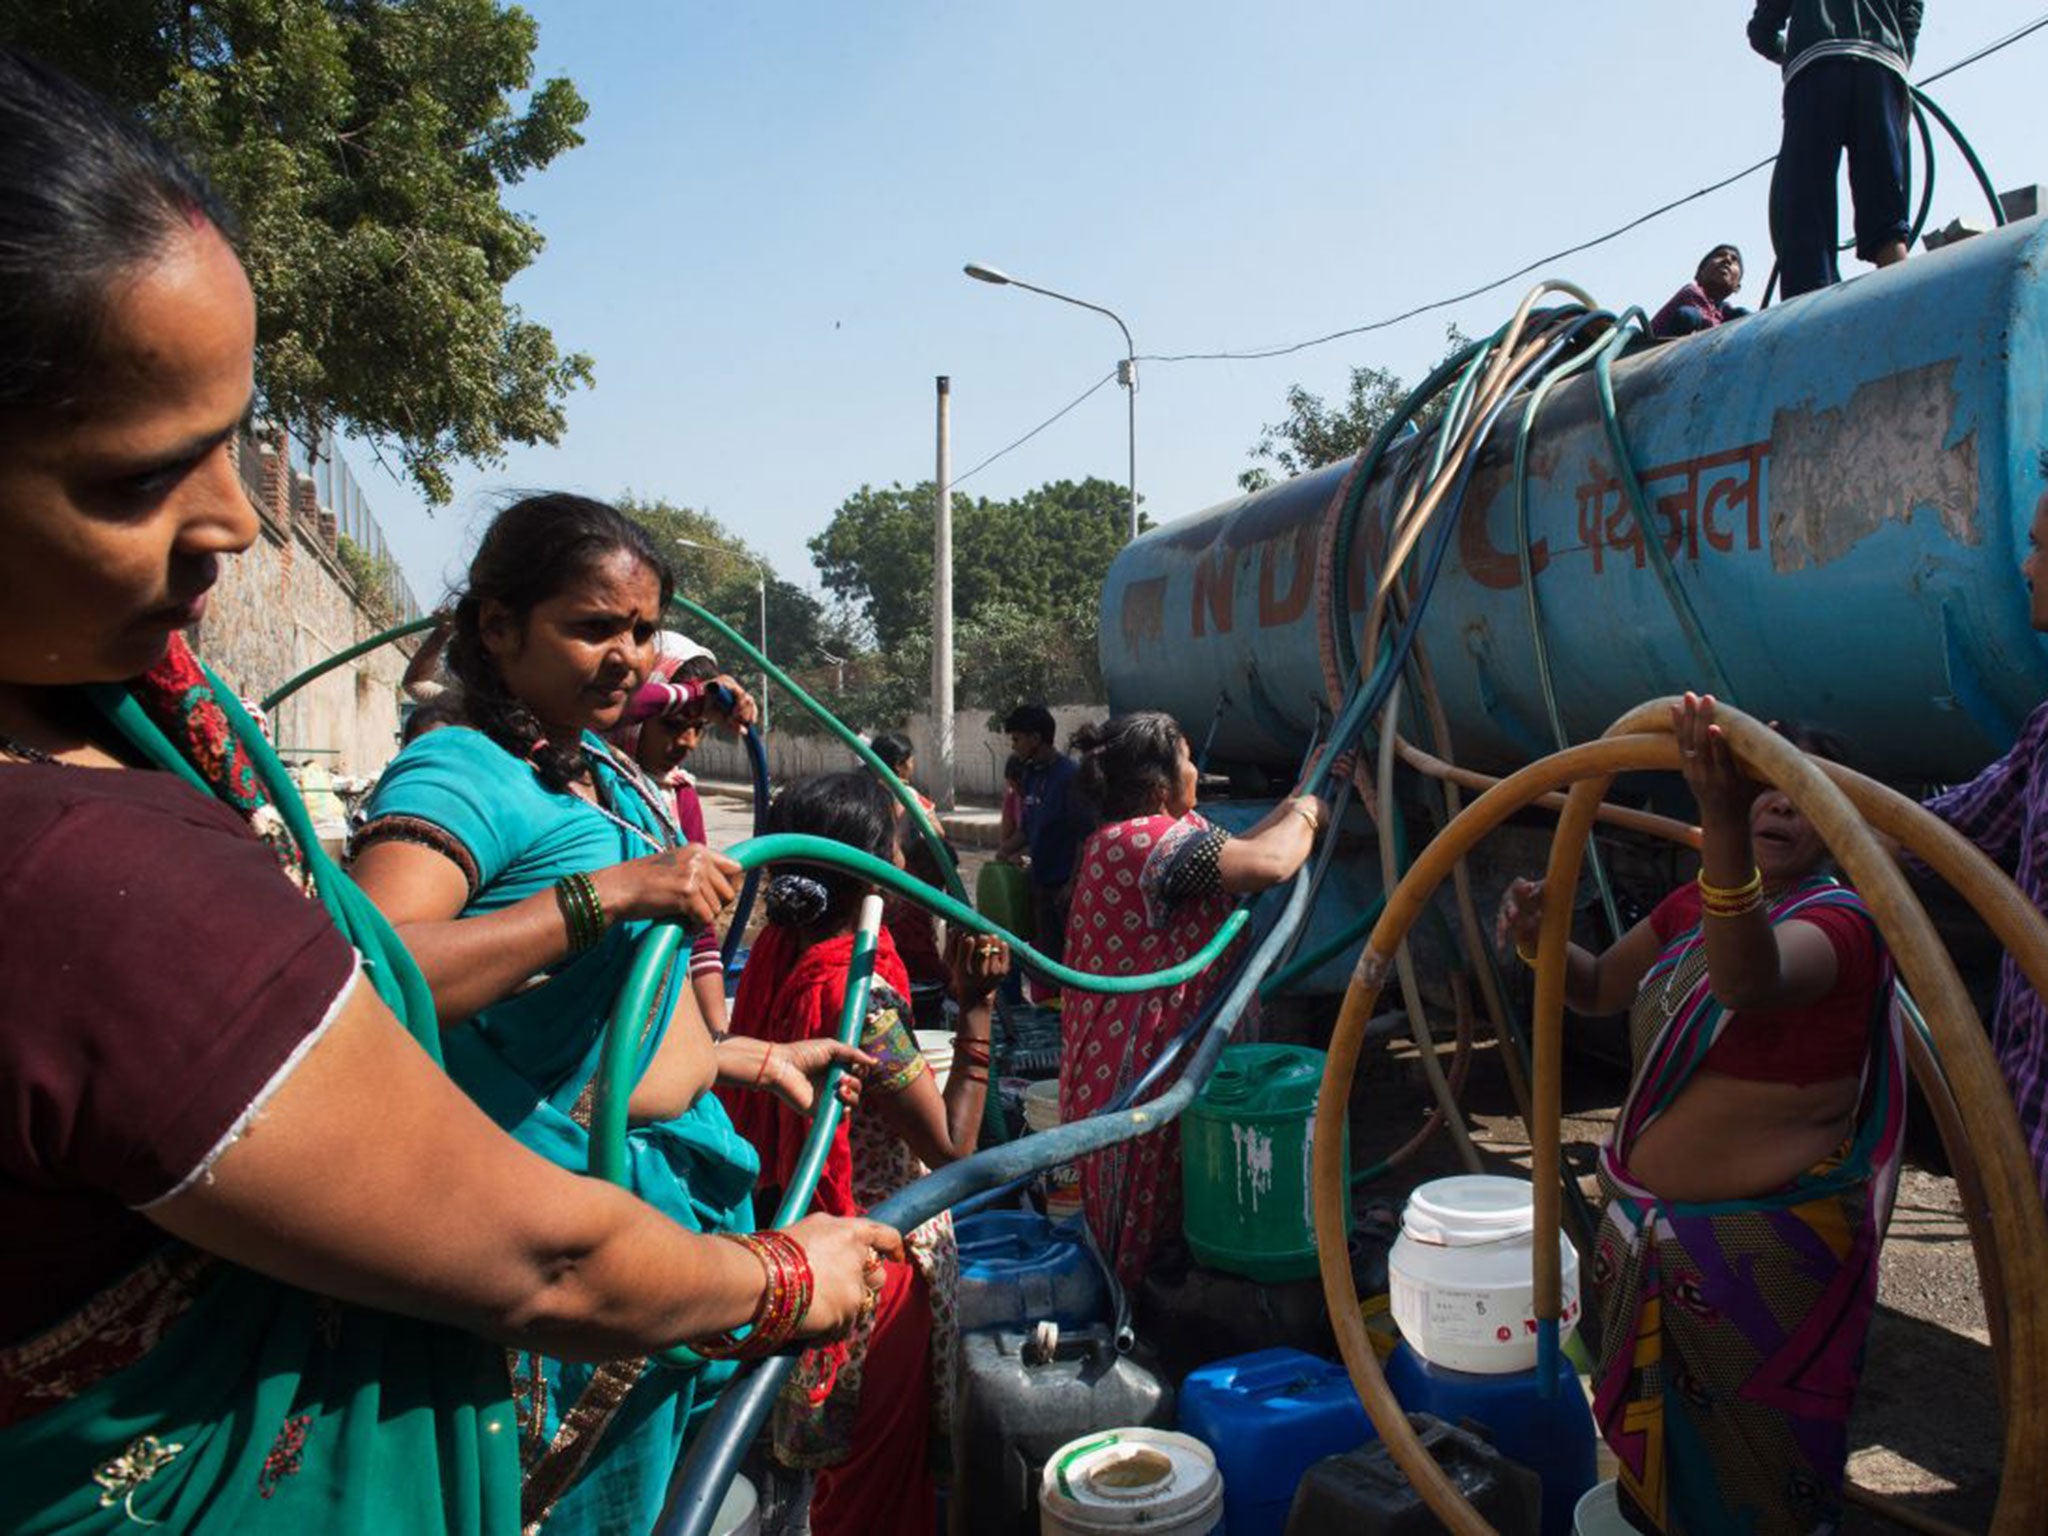 &#13;
Indian residents fill up from a water distribution truck in the low-income eastern New Delhi neighborhood of Sanjay &#13;